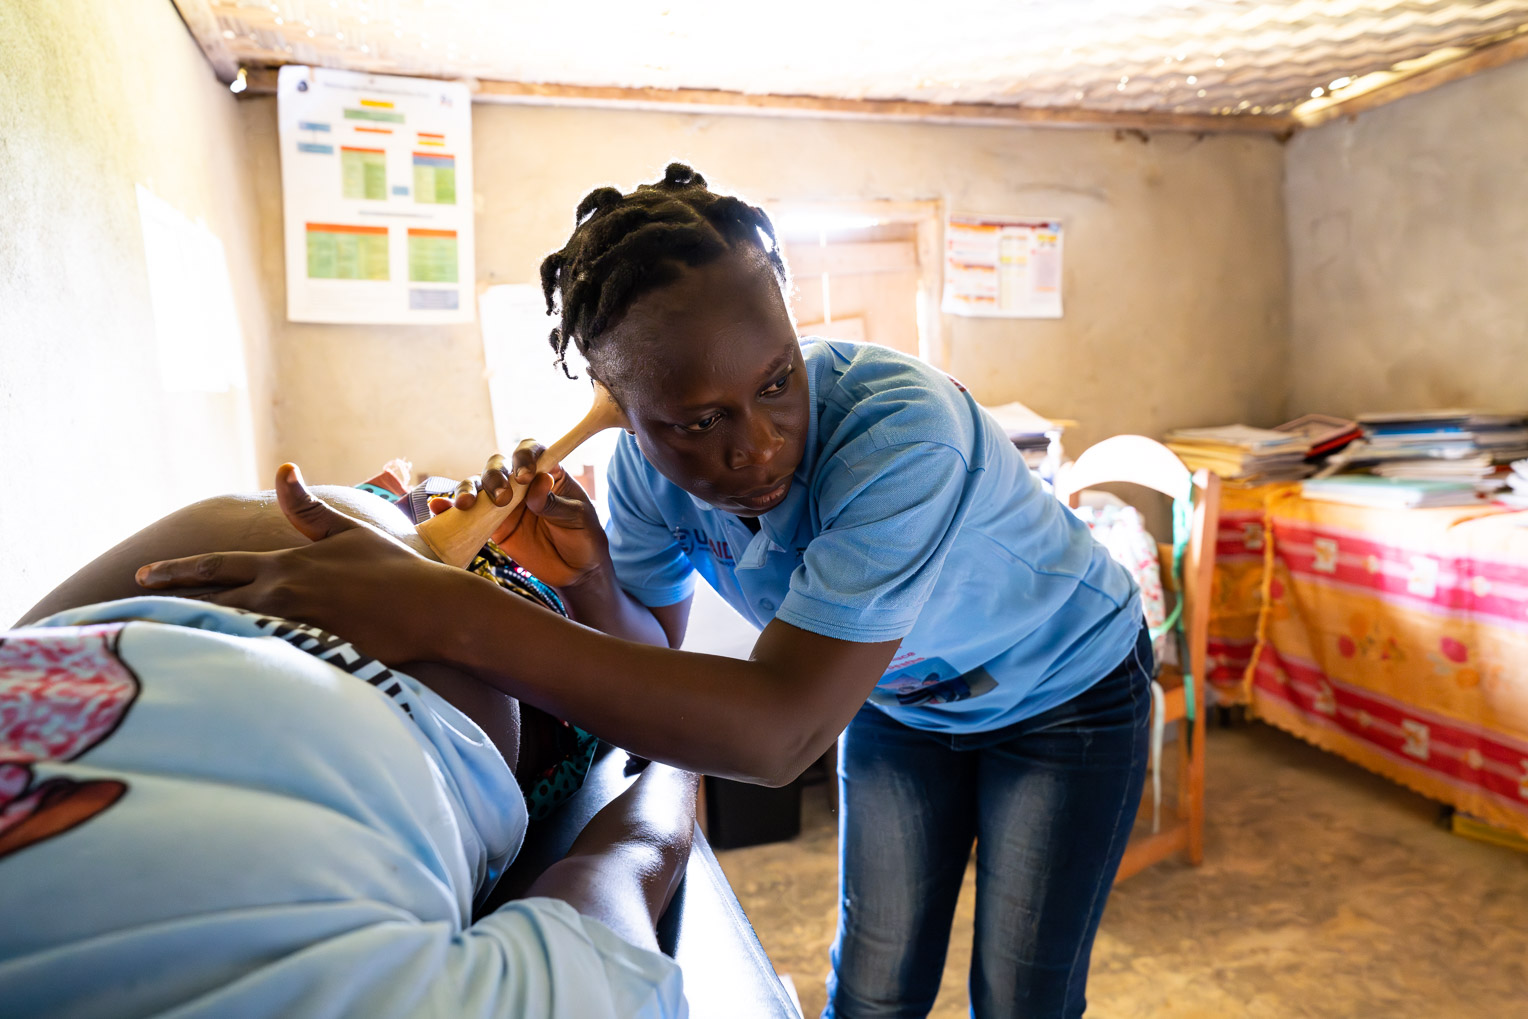 A nurse uses a listening tool to monitor a baby's health at a local clinic recently renovated by Samaritan's Purse with a maternity ward.